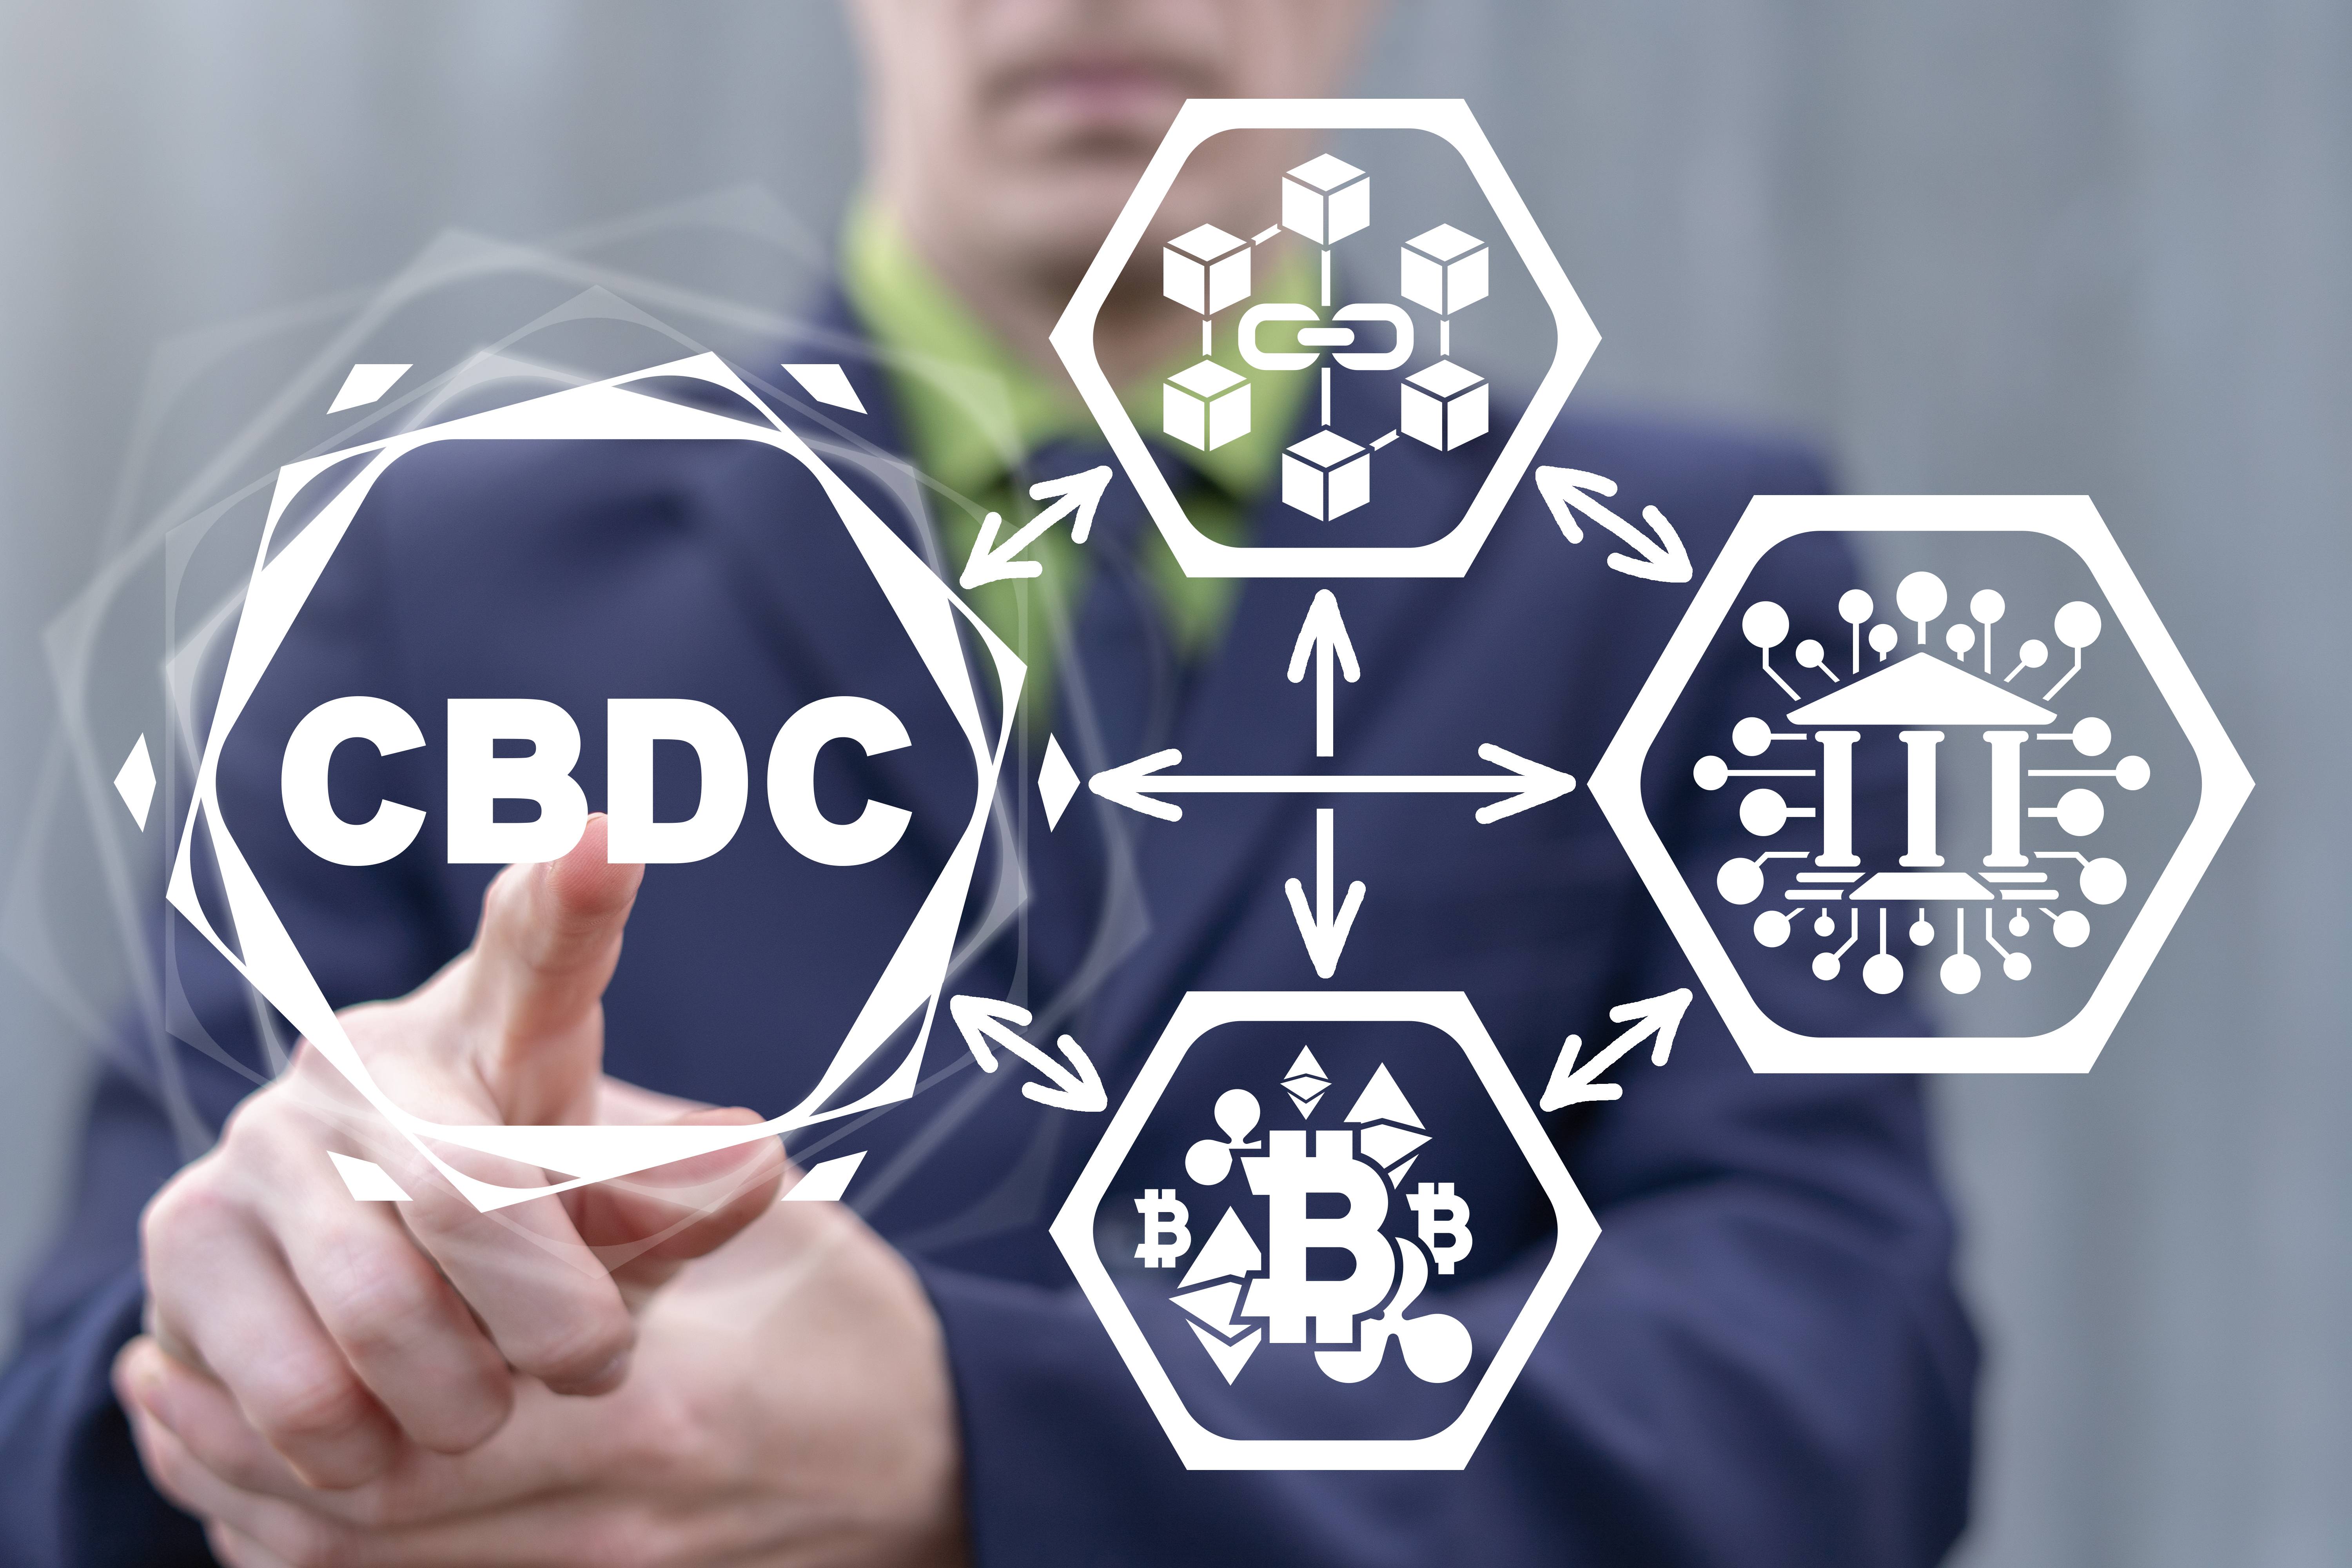 Why Bitcoin May Outlive The Influx of CBDCs